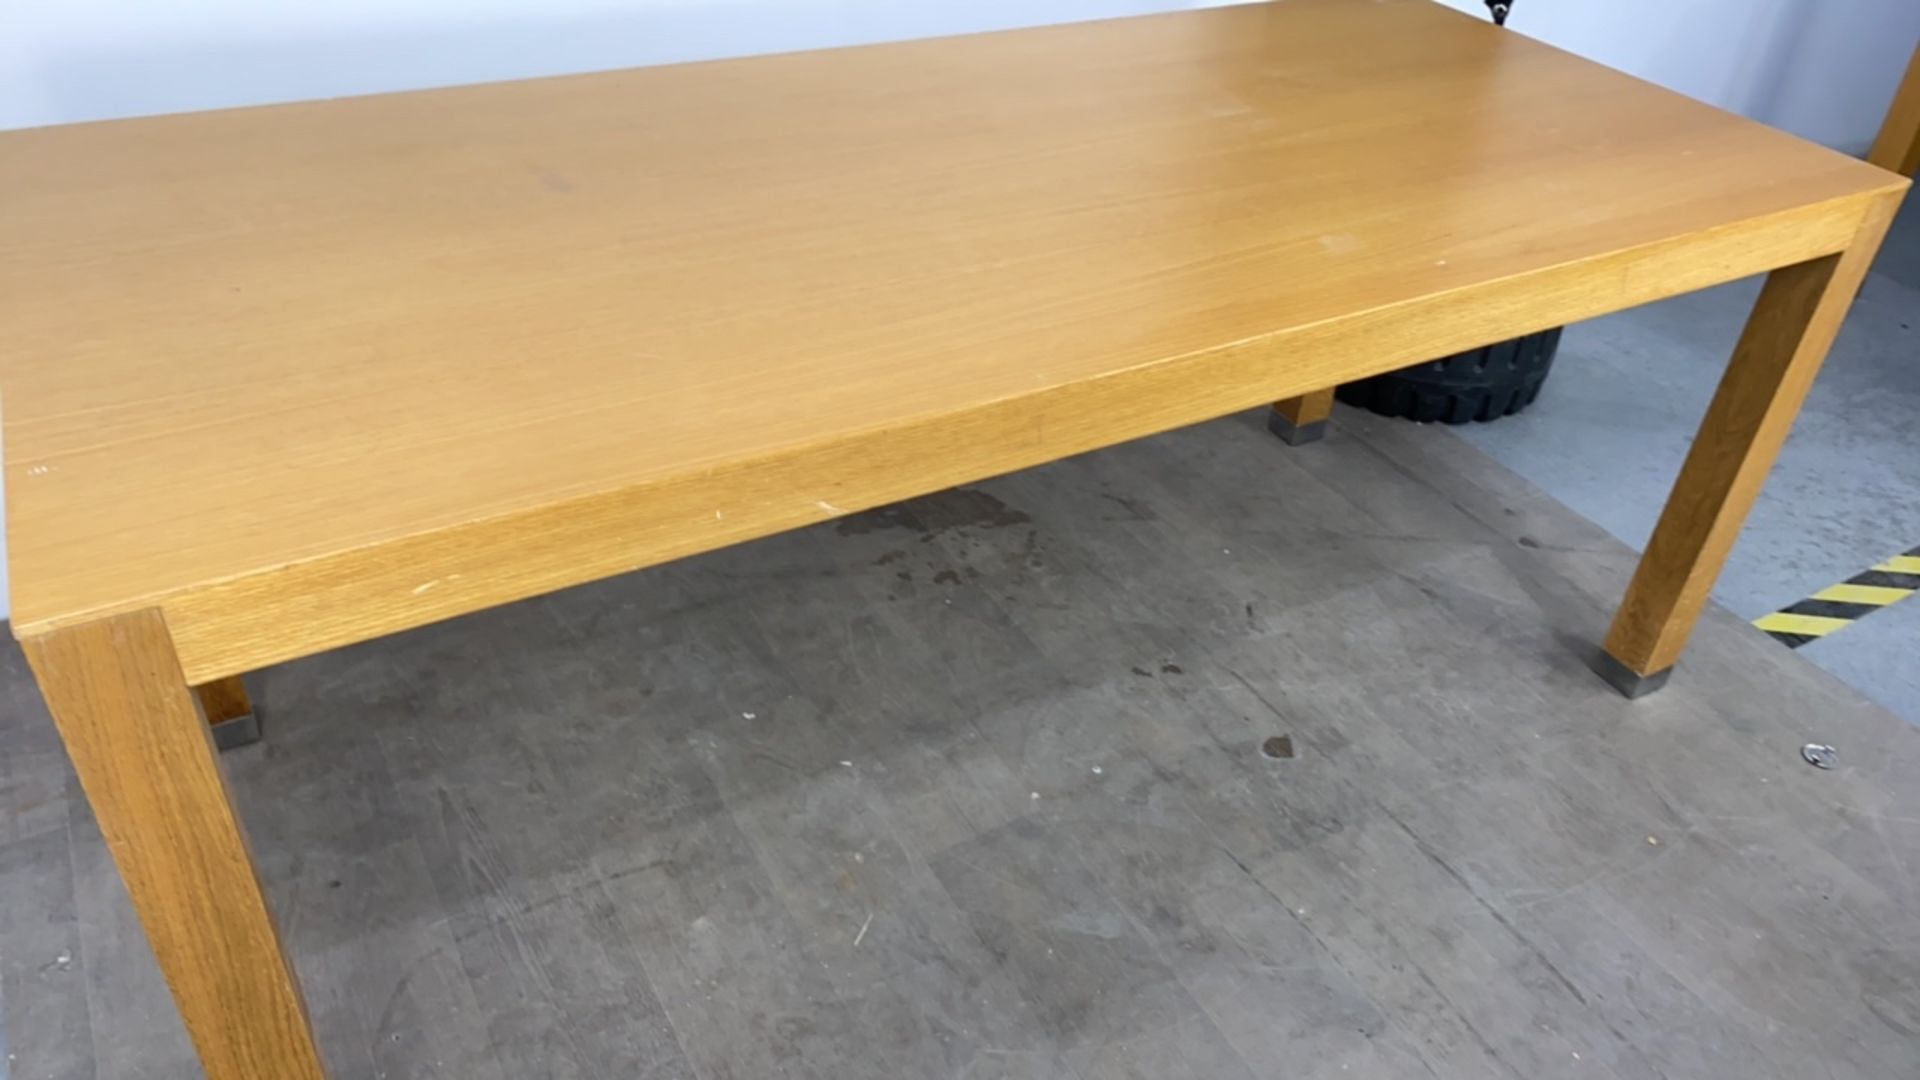 Large Wooden Table With Chromed Feet - Image 3 of 4